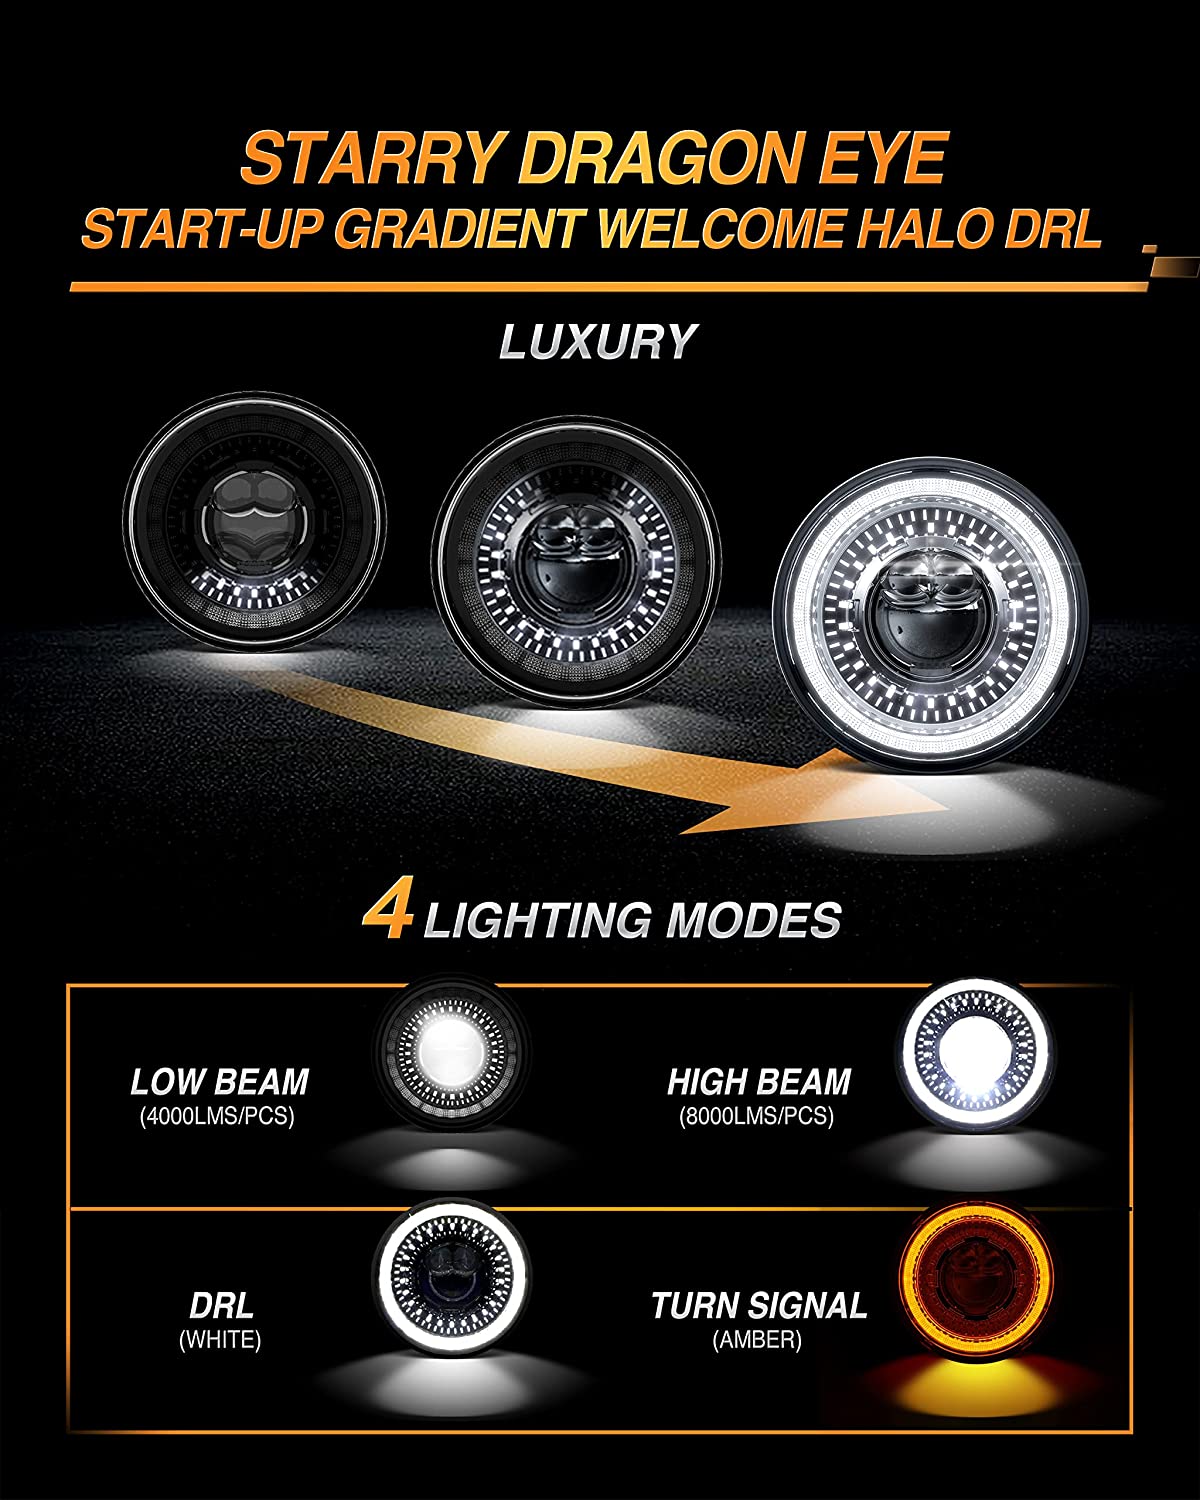 HWSTAR 1000% Bright Anti-Glare 7 Inch Round LED Headlights Compatible with Jeep Wrangler JK JKU TJ LJ Chevy Ford GMC etc. With Starry Boot Gradient Halo Turn Signal DRL H6024 DOT Hi/Lo Sealed Beam